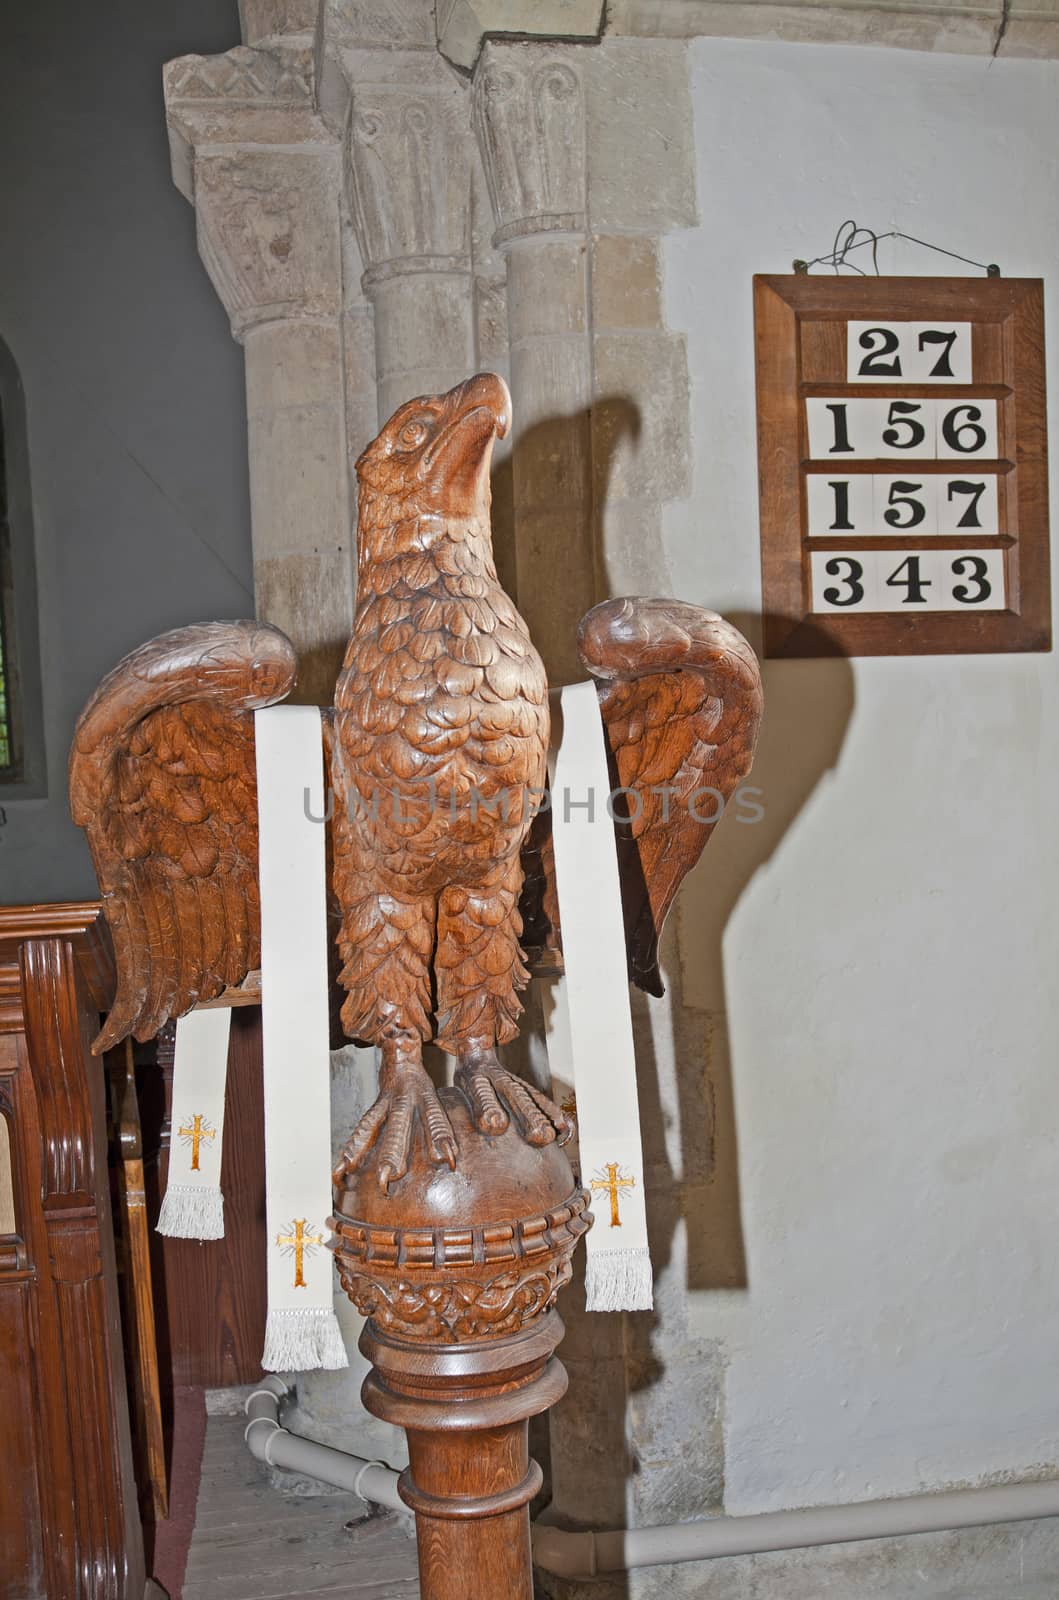 Wooden religious icon carved in the shape of an eagle in a small church